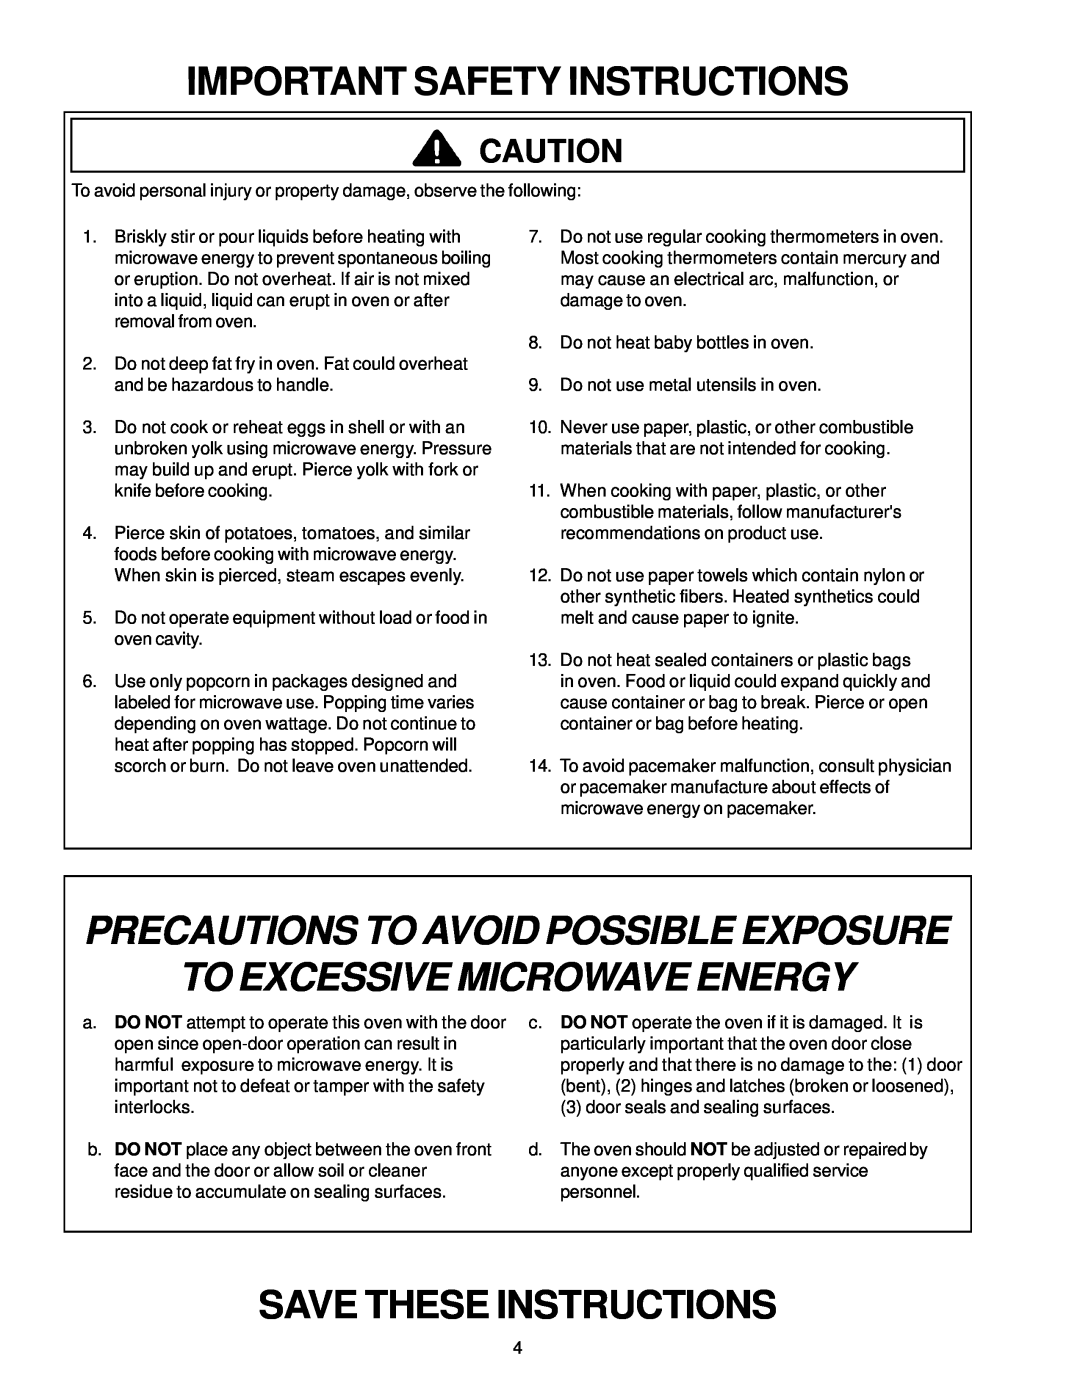 Amana rfs11MP, Rfs9mp Important Safety Instructions, Precautions To Avoid Possible Exposure To Excessive Microwave Energy 